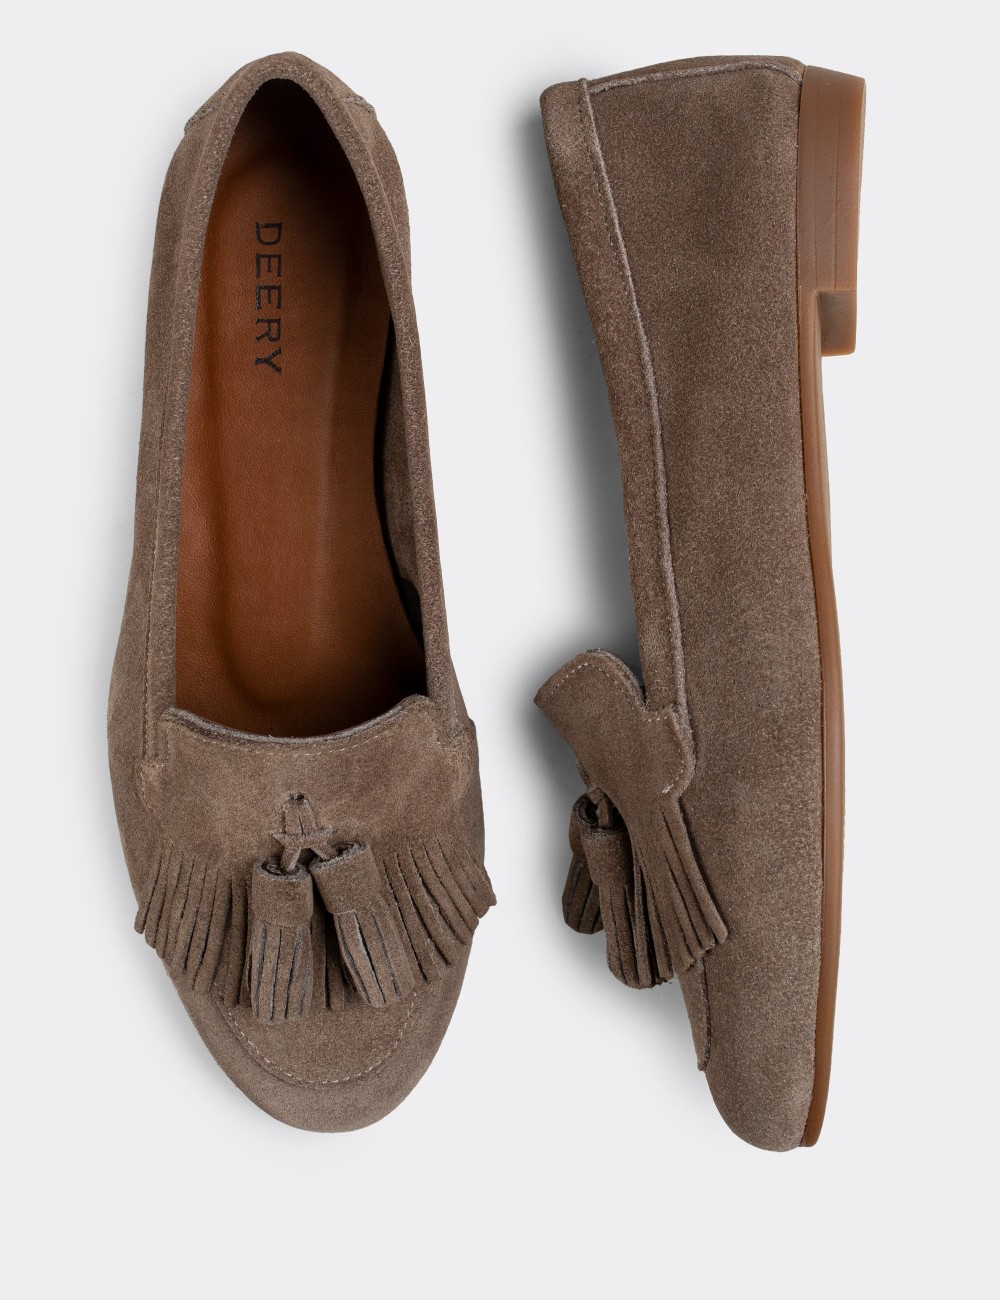 Sandstone Suede Leather Loafers - E3203ZVZNC01